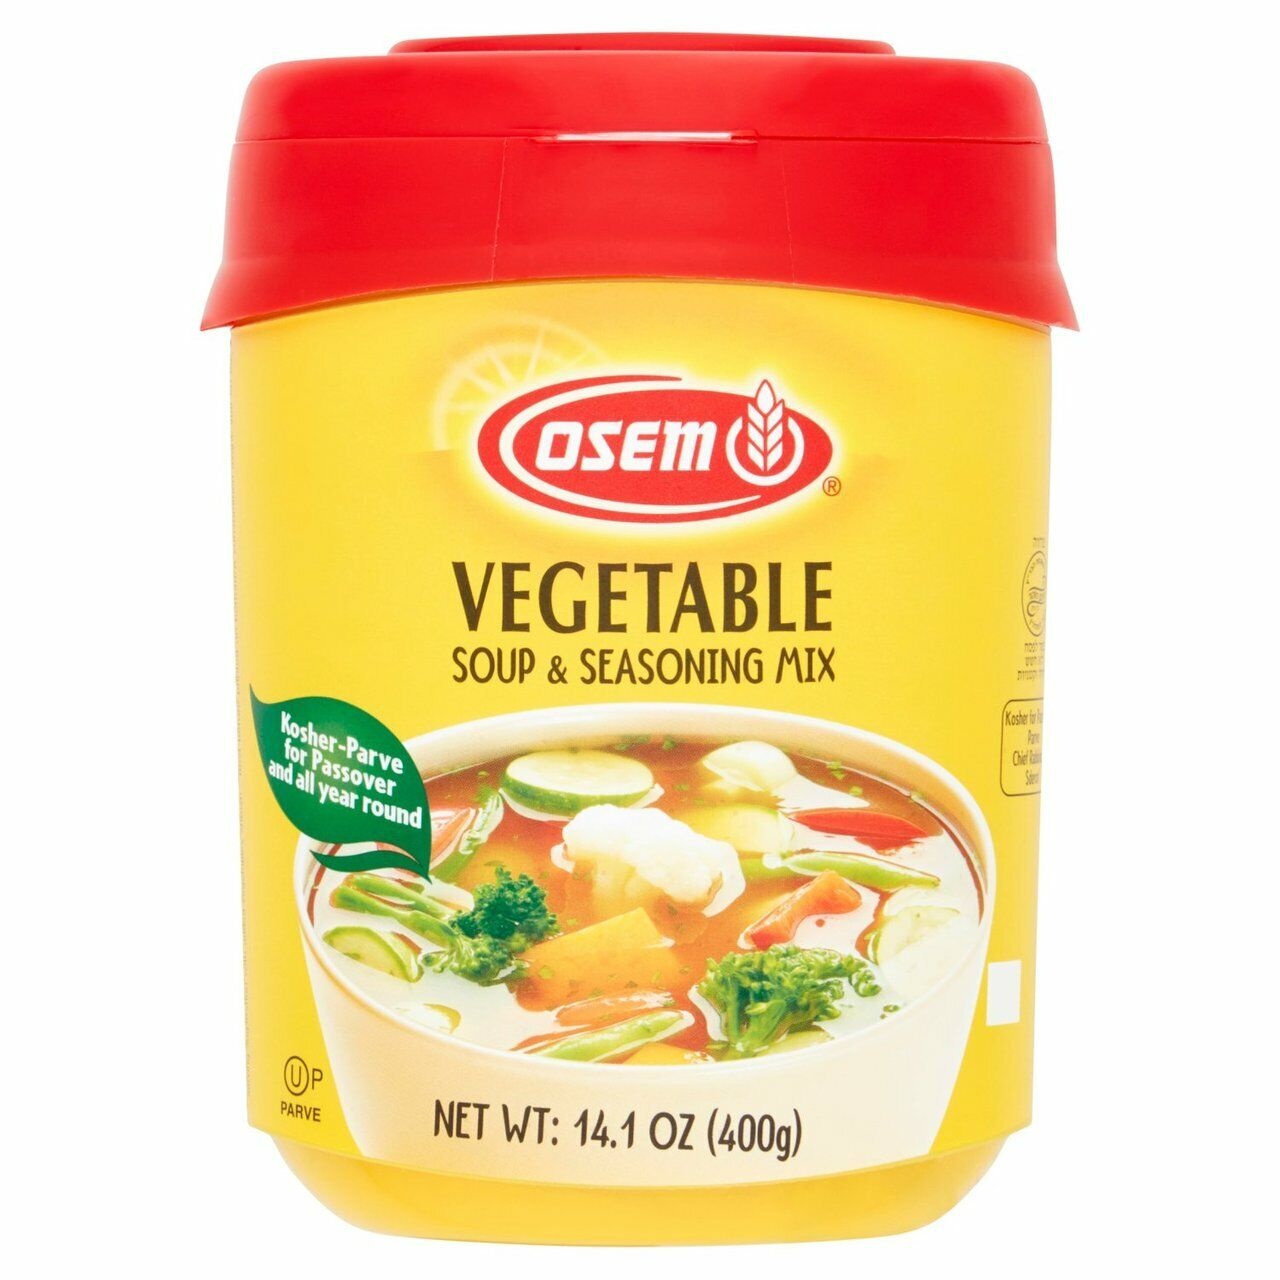 Osem Kosher Consomme Instant Soup and Seasoning Mix - Shop Broth